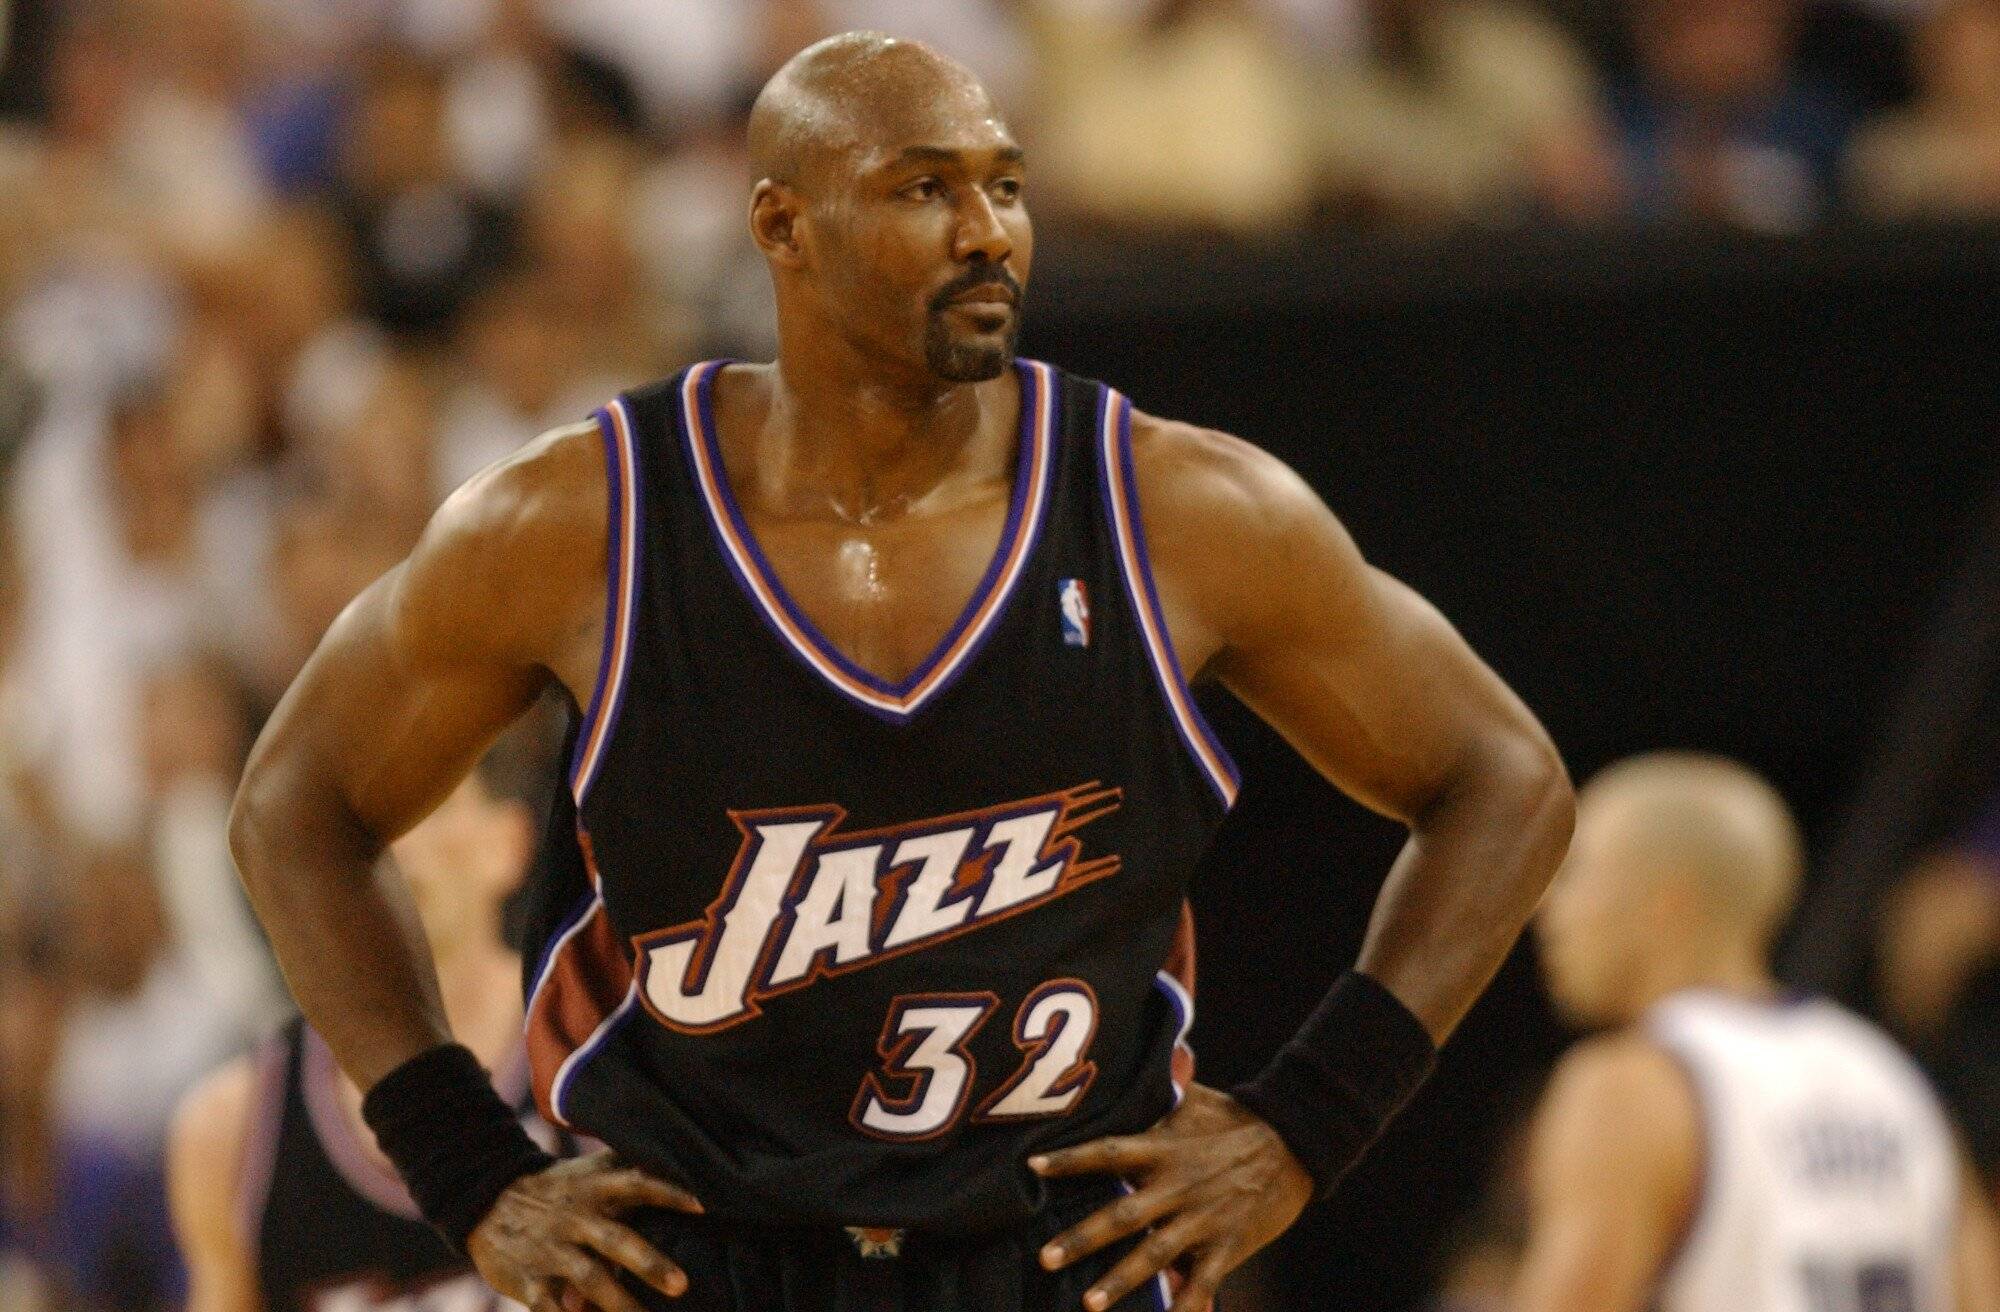 Karl Malone 2021 - Net Worth, Salary, Records, and Endorsements